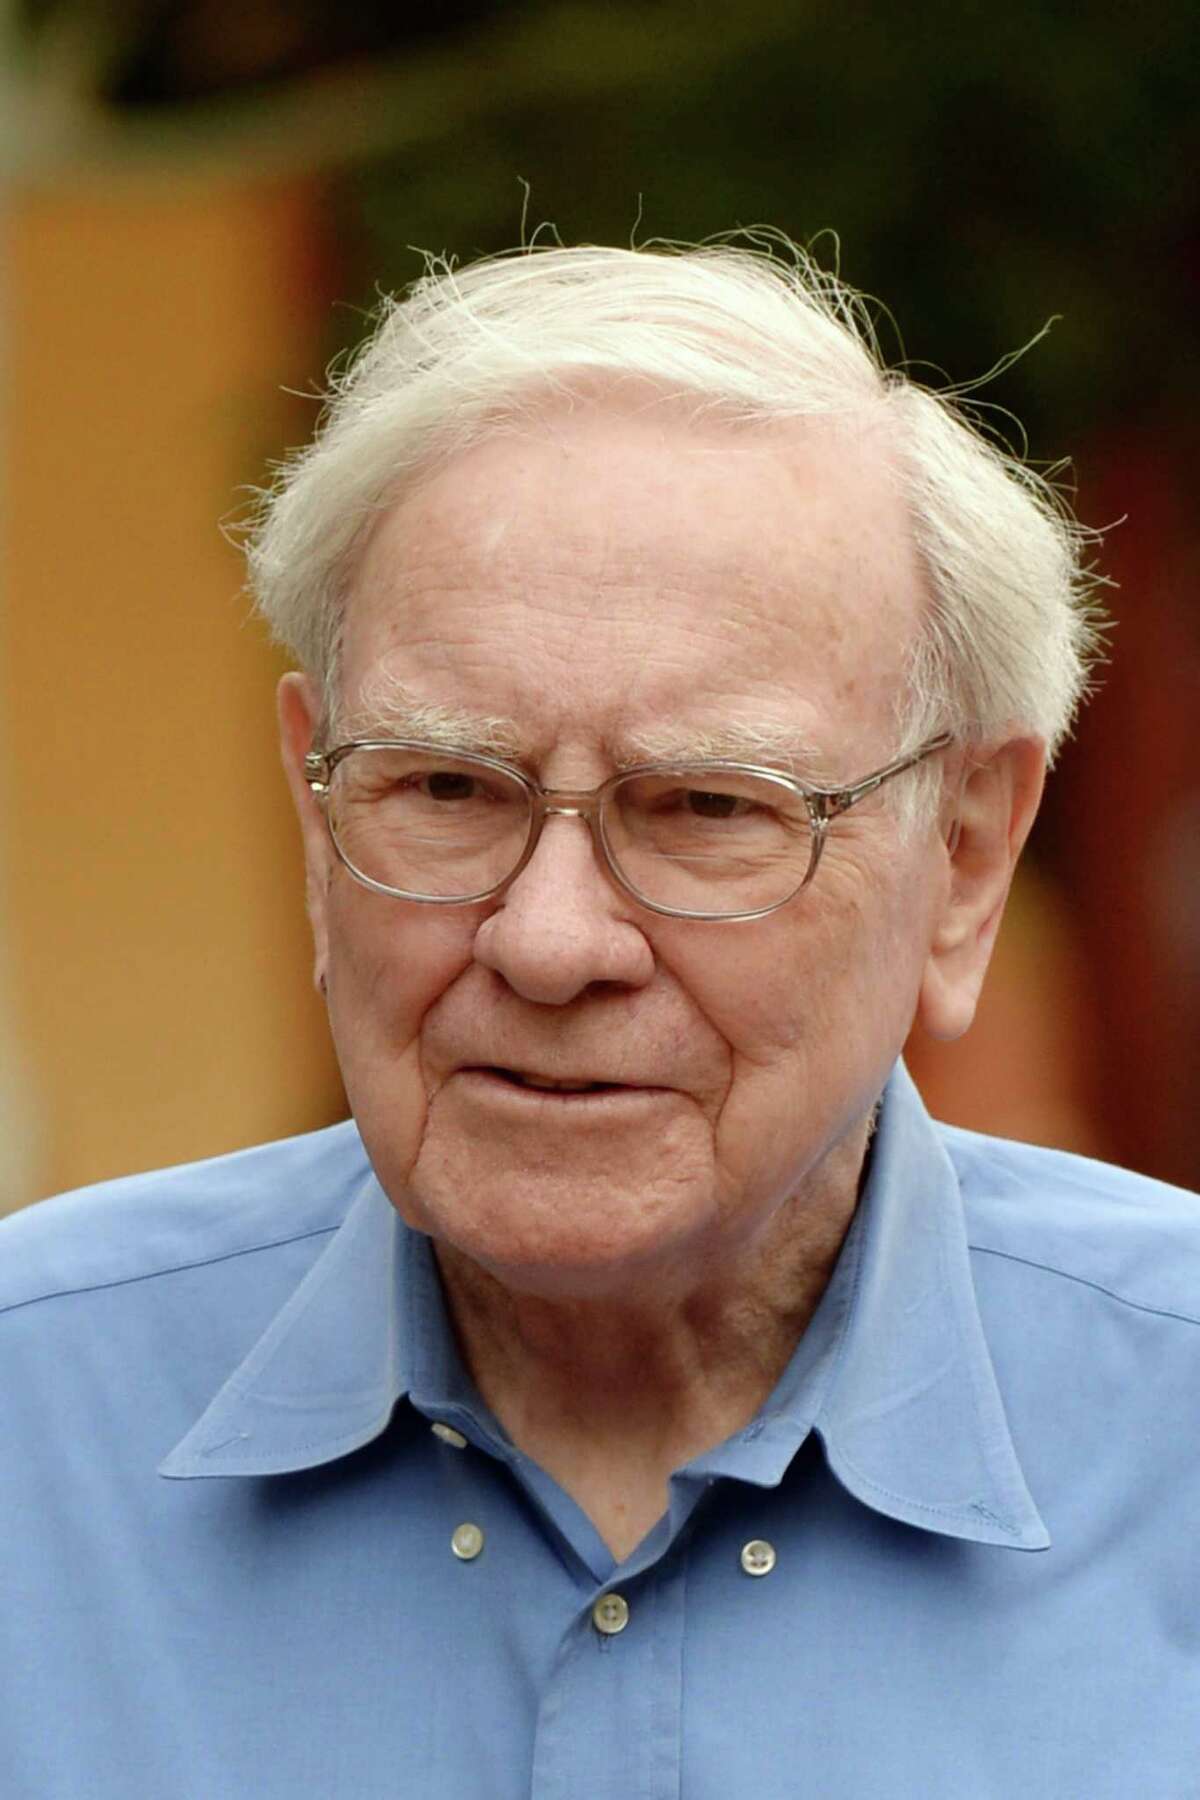 FILE - AUGUST 19, 2015: It was reported that Warren Buffett's Berkshire Hathaway to pay $37.2 billion for Precision Castparts, the most it has ever paid for a company August 10, 2015. SUN VALLEY, ID - JULY 12: Chairman and CEO of Berkshire Hathaway Warren Buffett returns after a lunch break during the Allen & Co. annual conference at the Sun Valley Resort on July 11, 2013 in Sun Valley, Idaho. The resort is hosting corporate leaders for the 31st annual Allen & Co. media and technology conference where some of the wealthiest and most powerful executives in media, finance, politics and tech gather for weeklong meetings. Past attendees included Warren Buffett, Bill Gates and Mark Zuckerberg. (Photo by Kevork Djansezian/Getty Images)